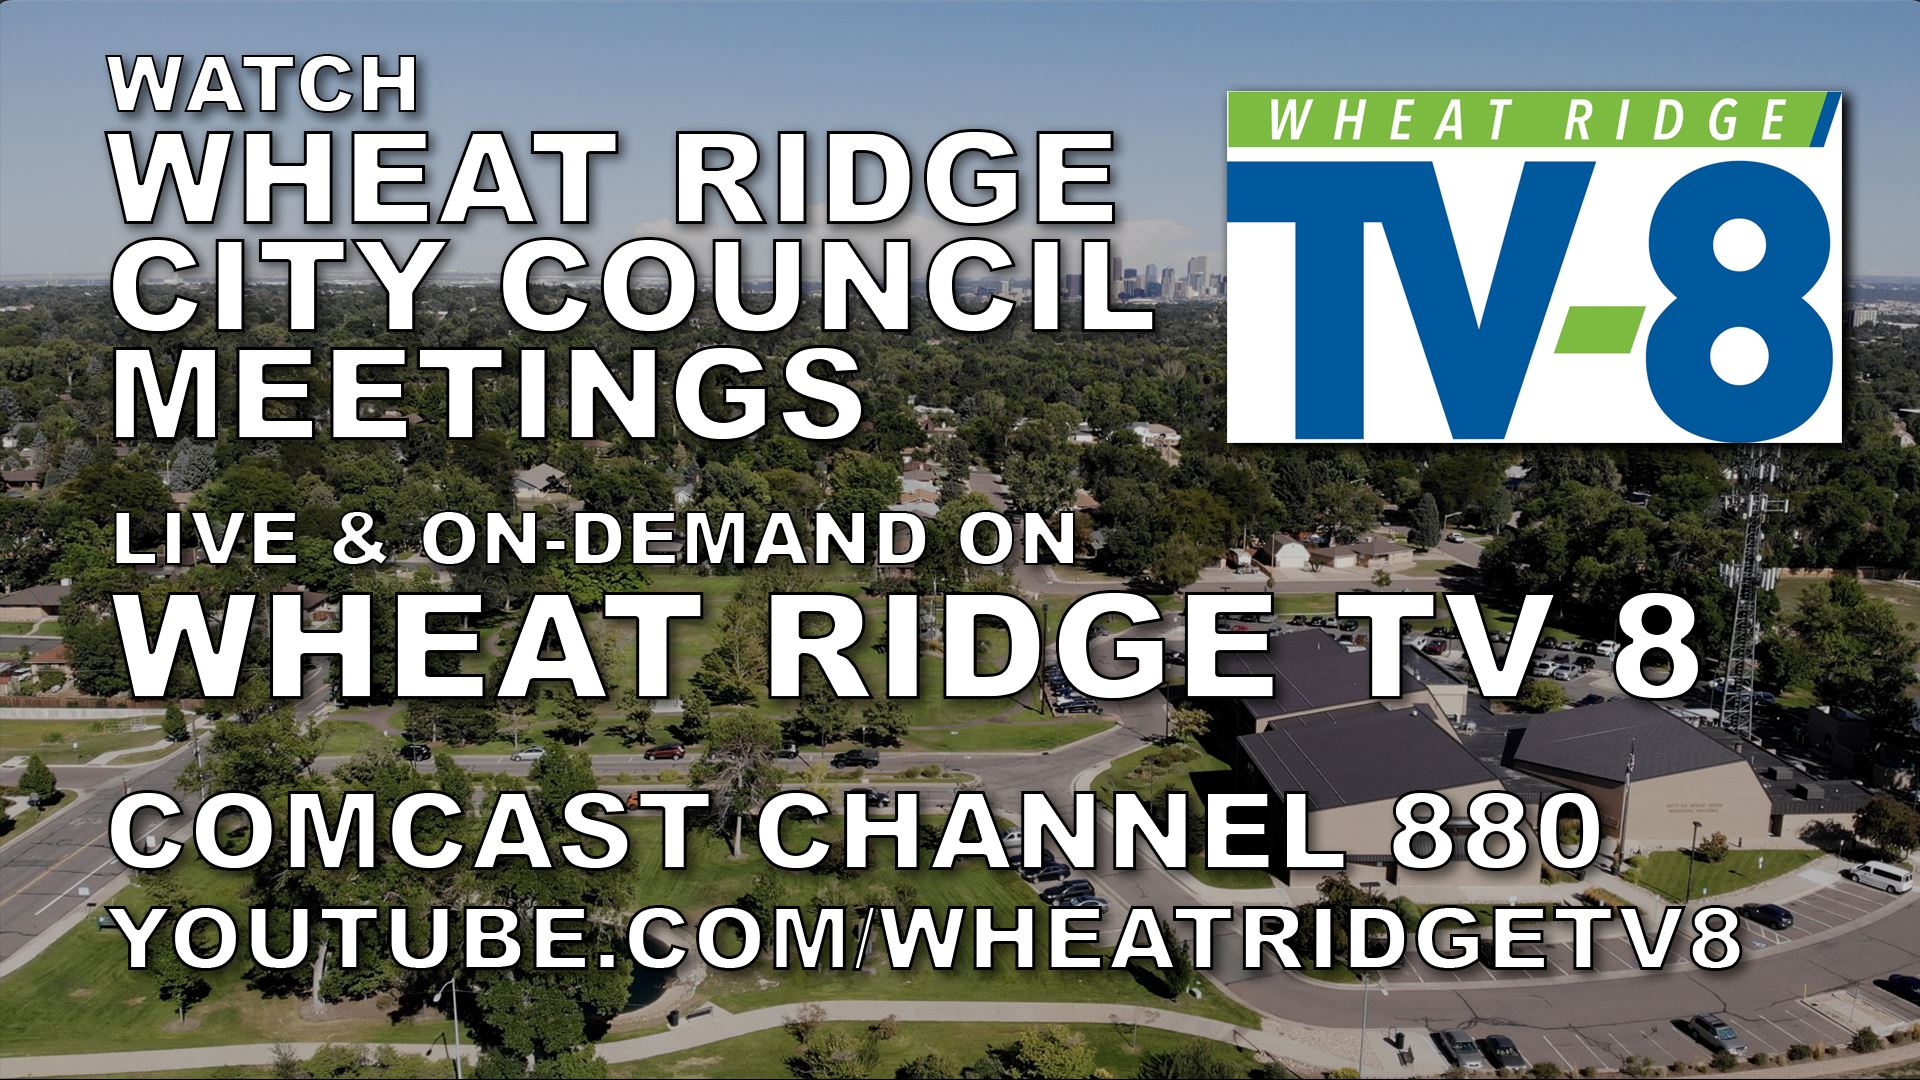 Graphic Link to Wheat Ridge TV 8 YouTube Channel